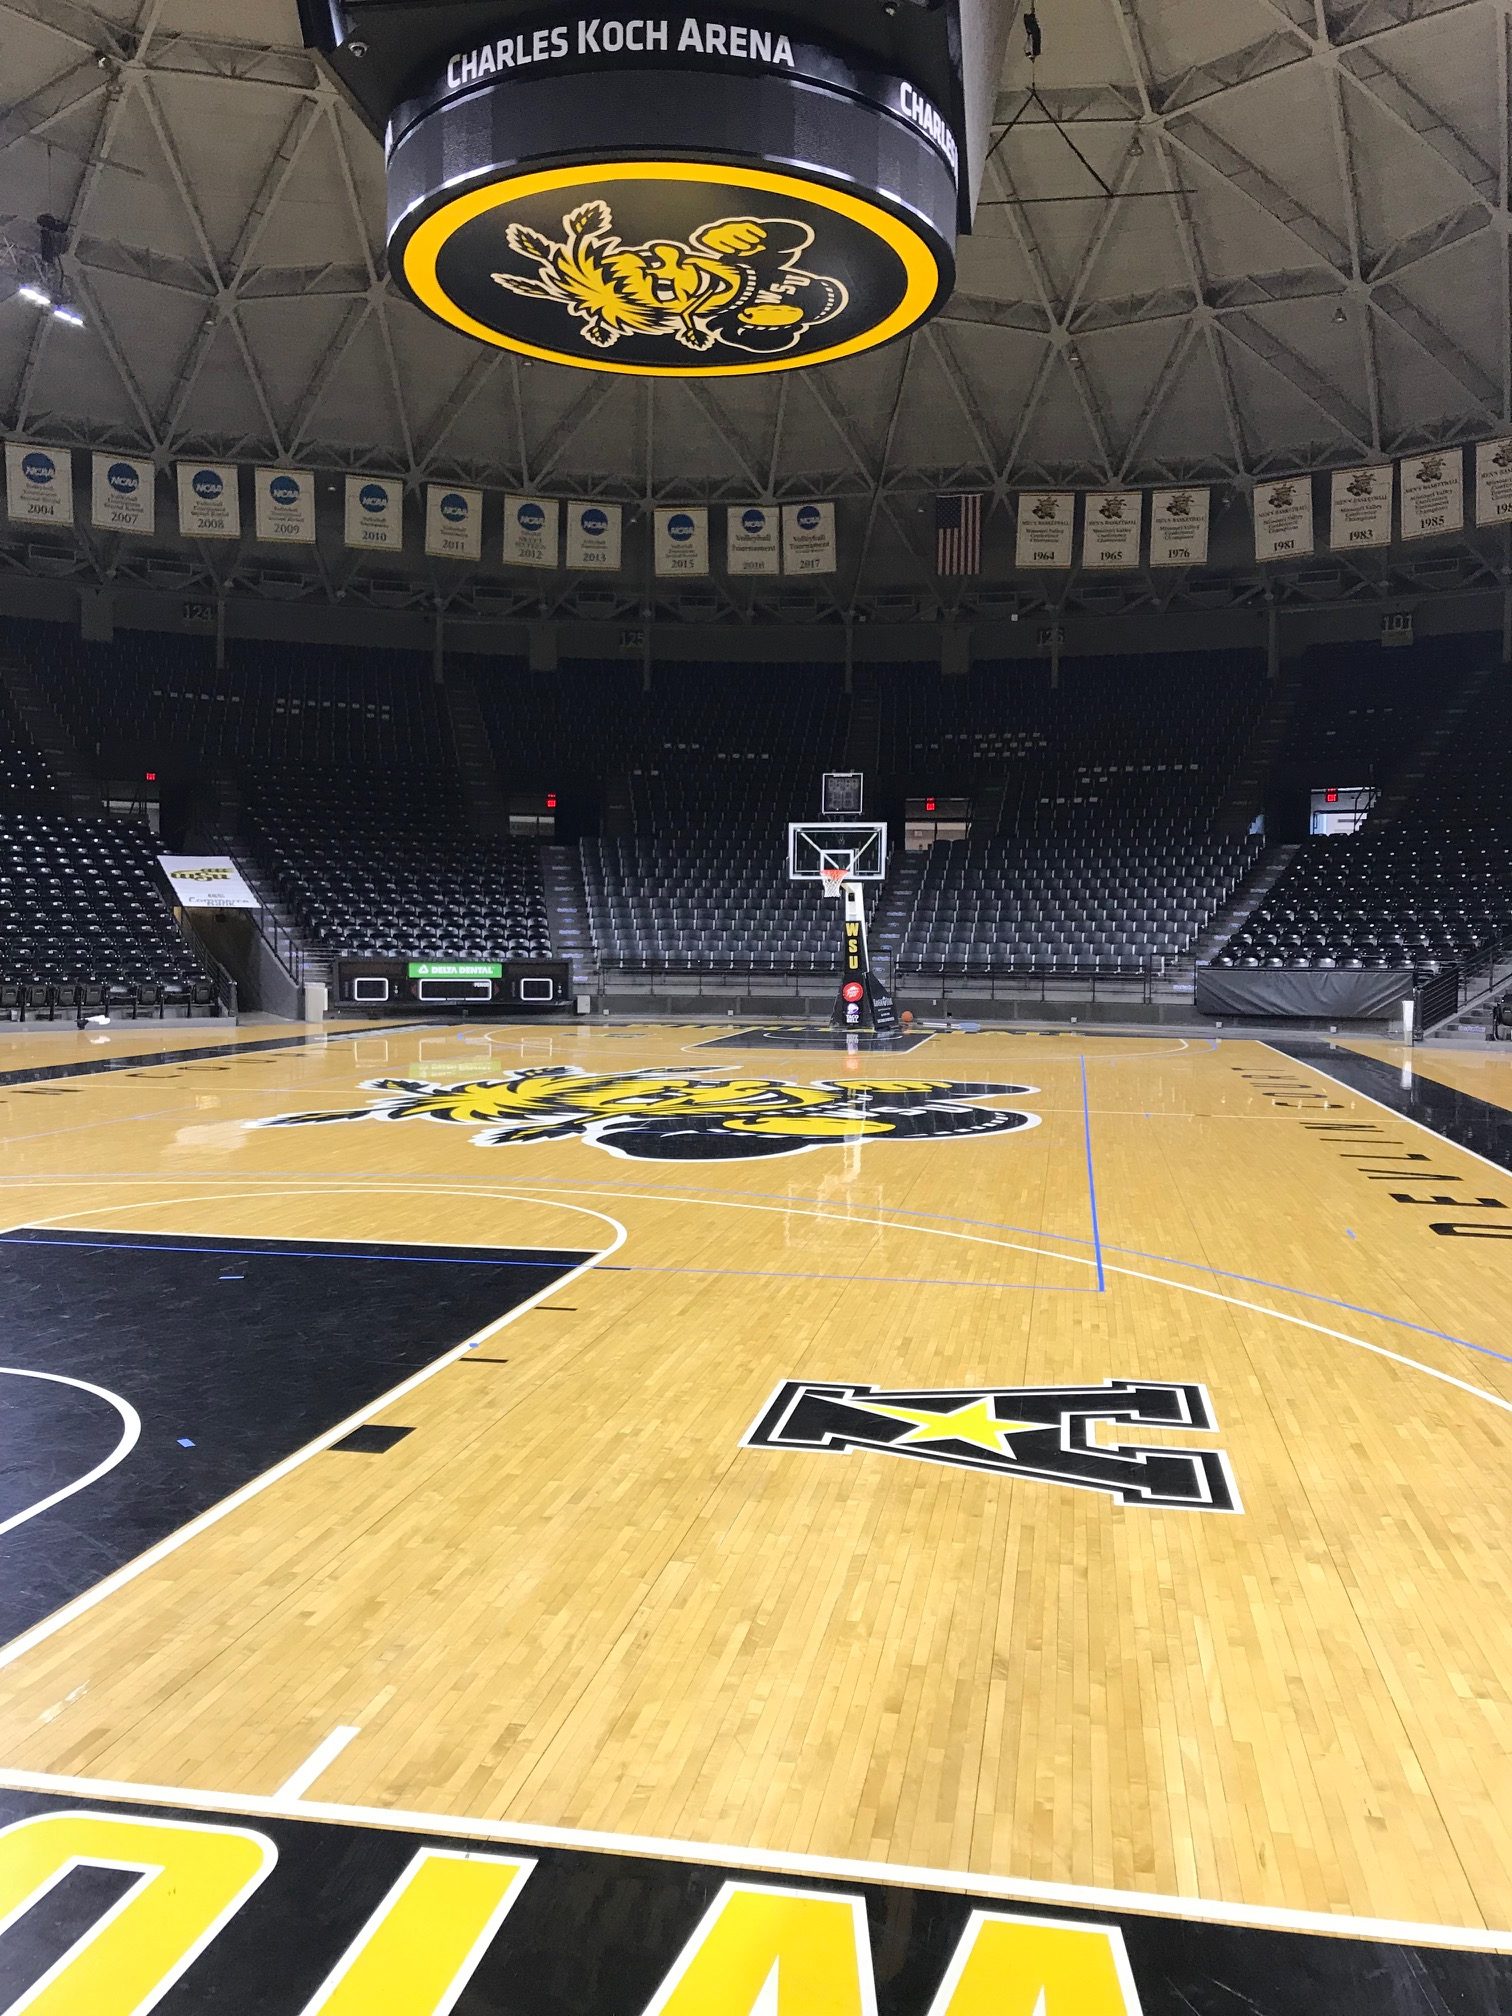 Decker Electric completed a DAS project at Wichita State University in 2019